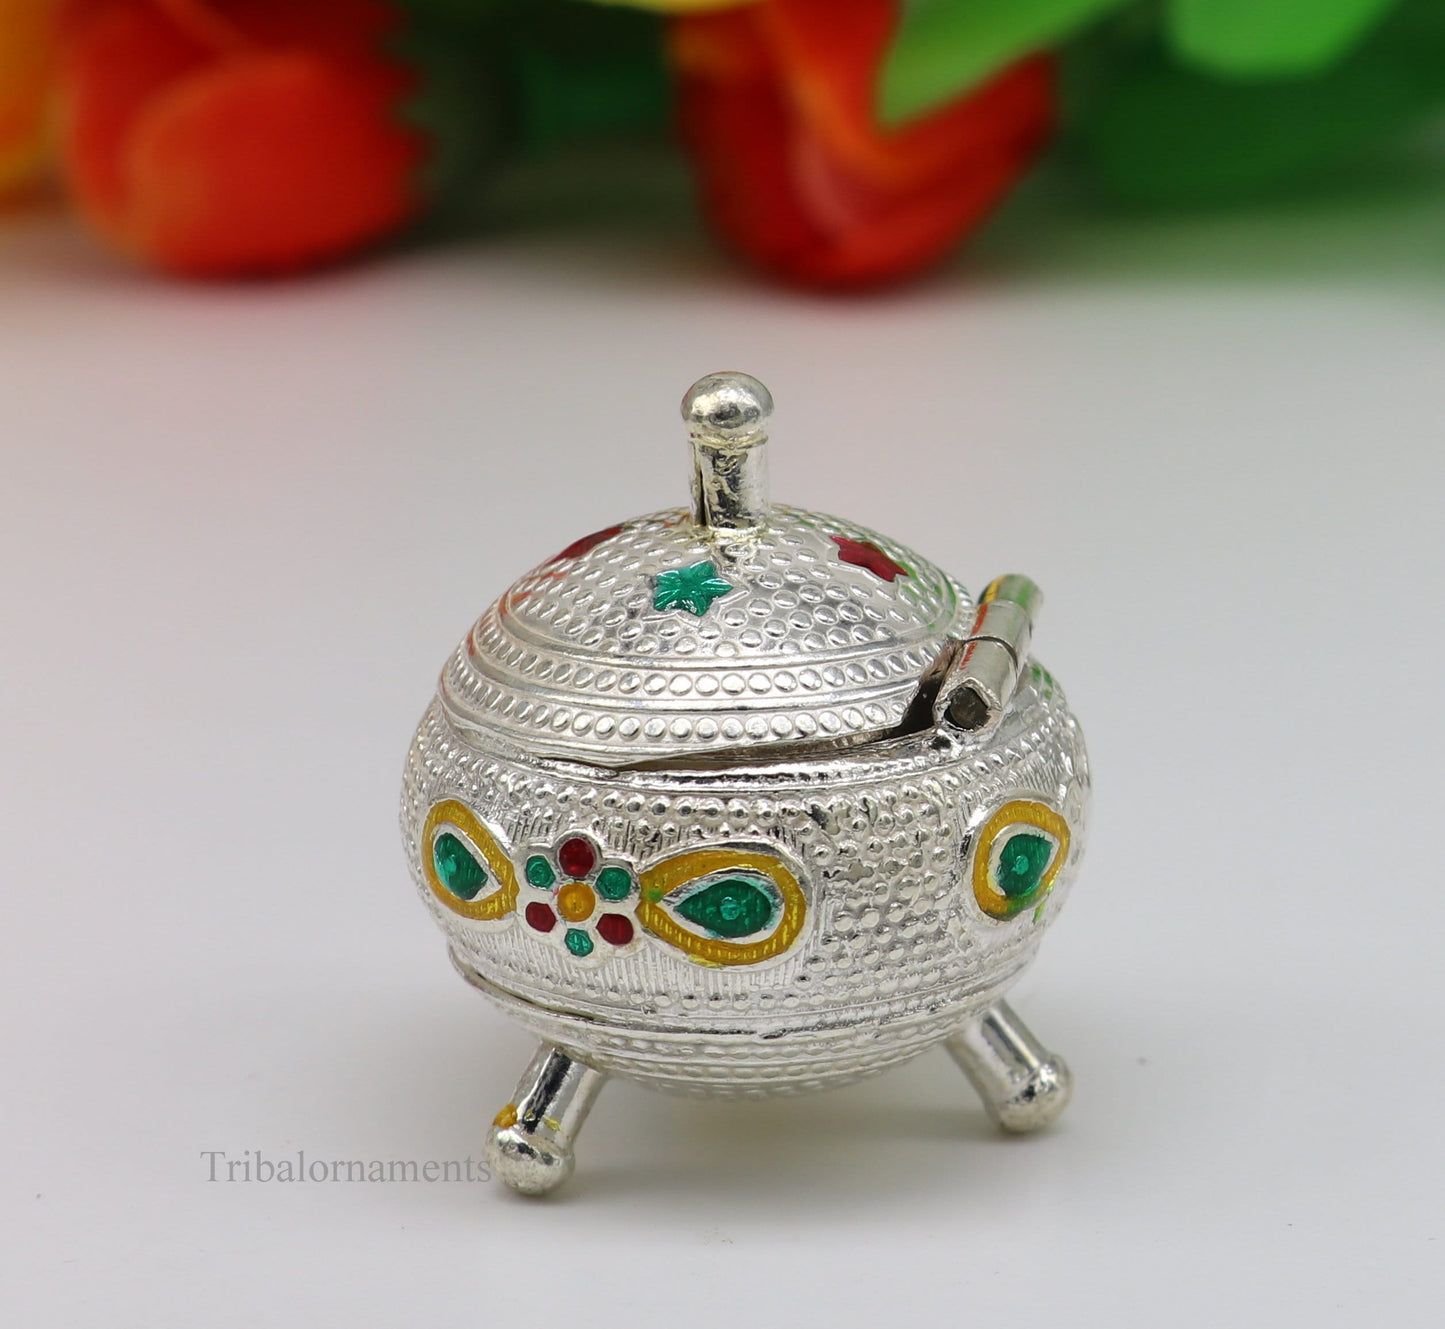 925 Sterling silver handmade fabulous trinket box, solid container box, casket box, sindoor box, enamel work customized gifting box stb179 - TRIBAL ORNAMENTS